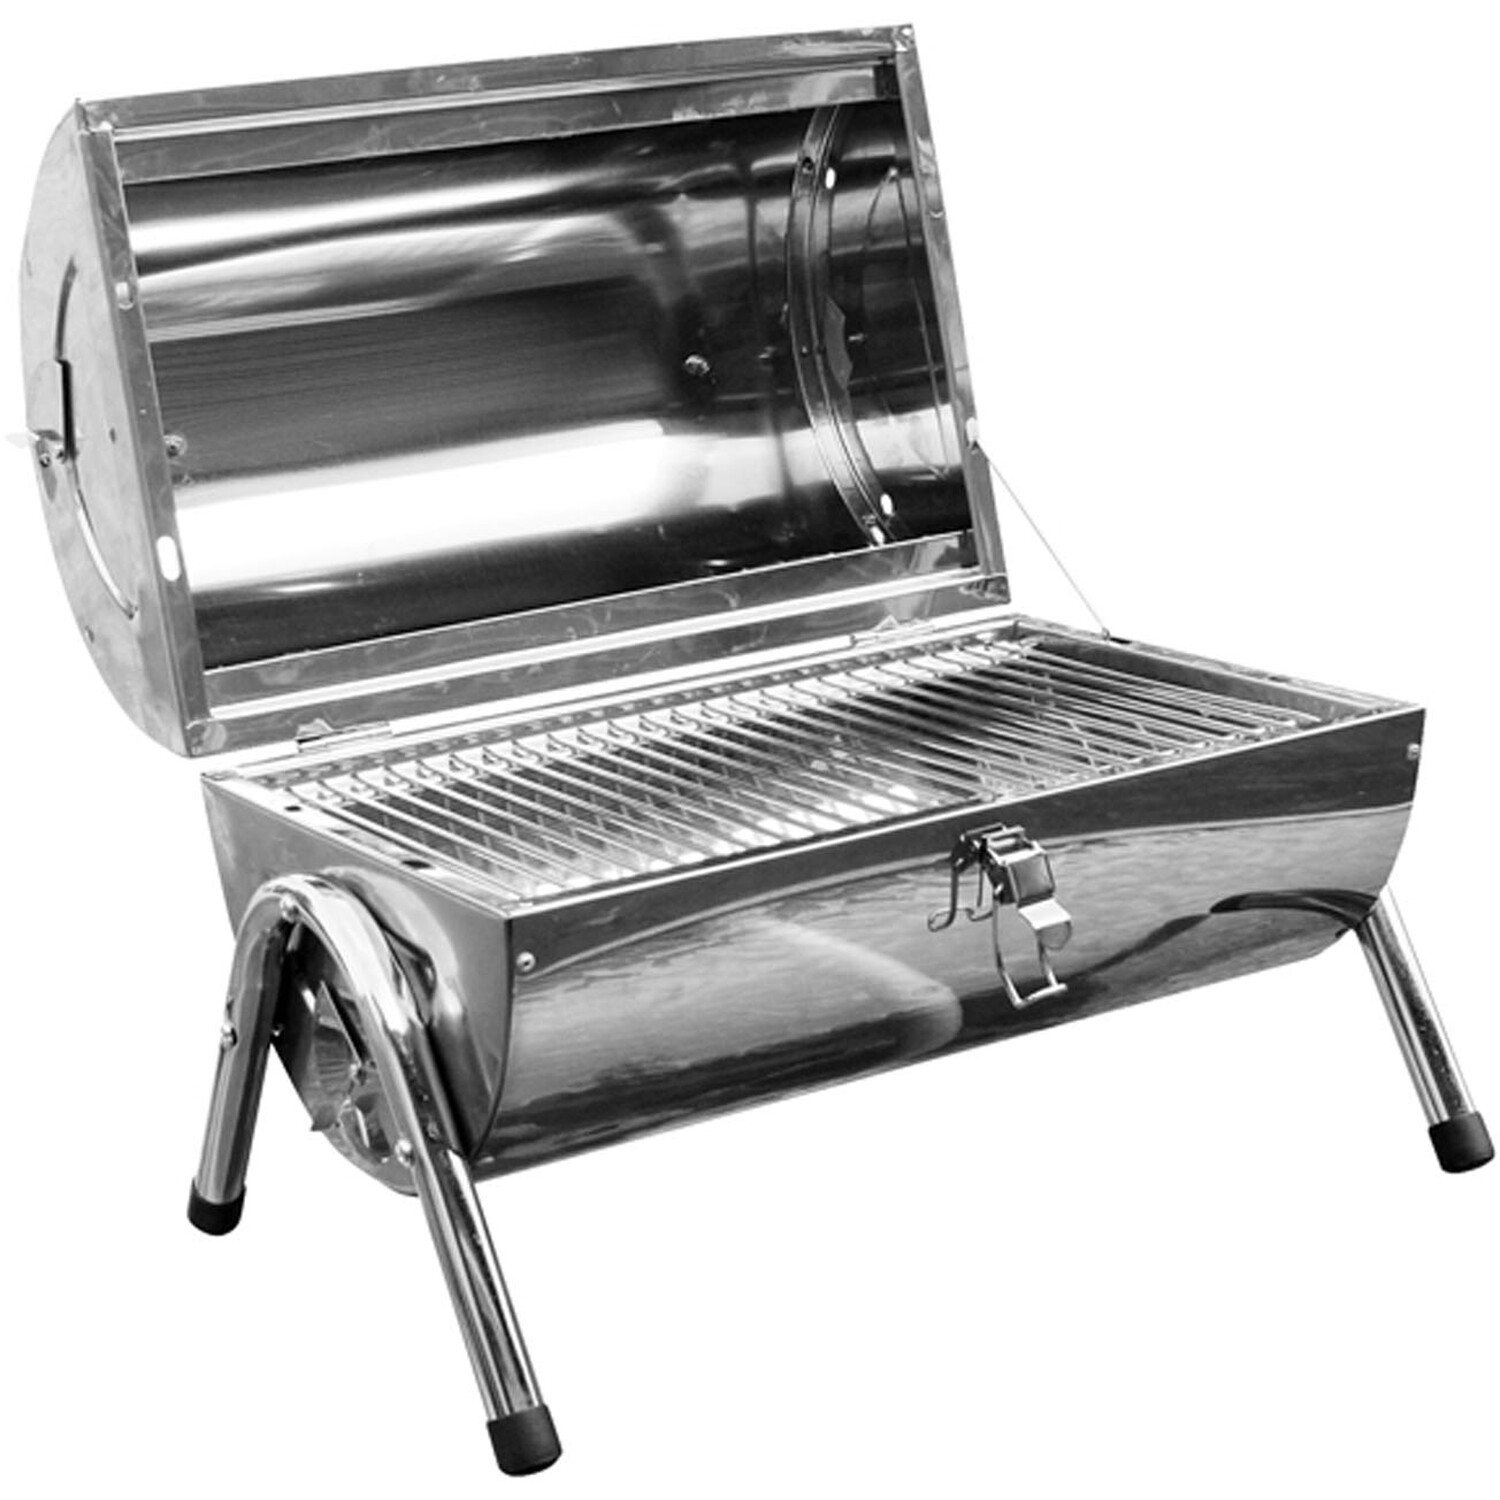 Portable Barrel Stainless Steel BBQ Image 1